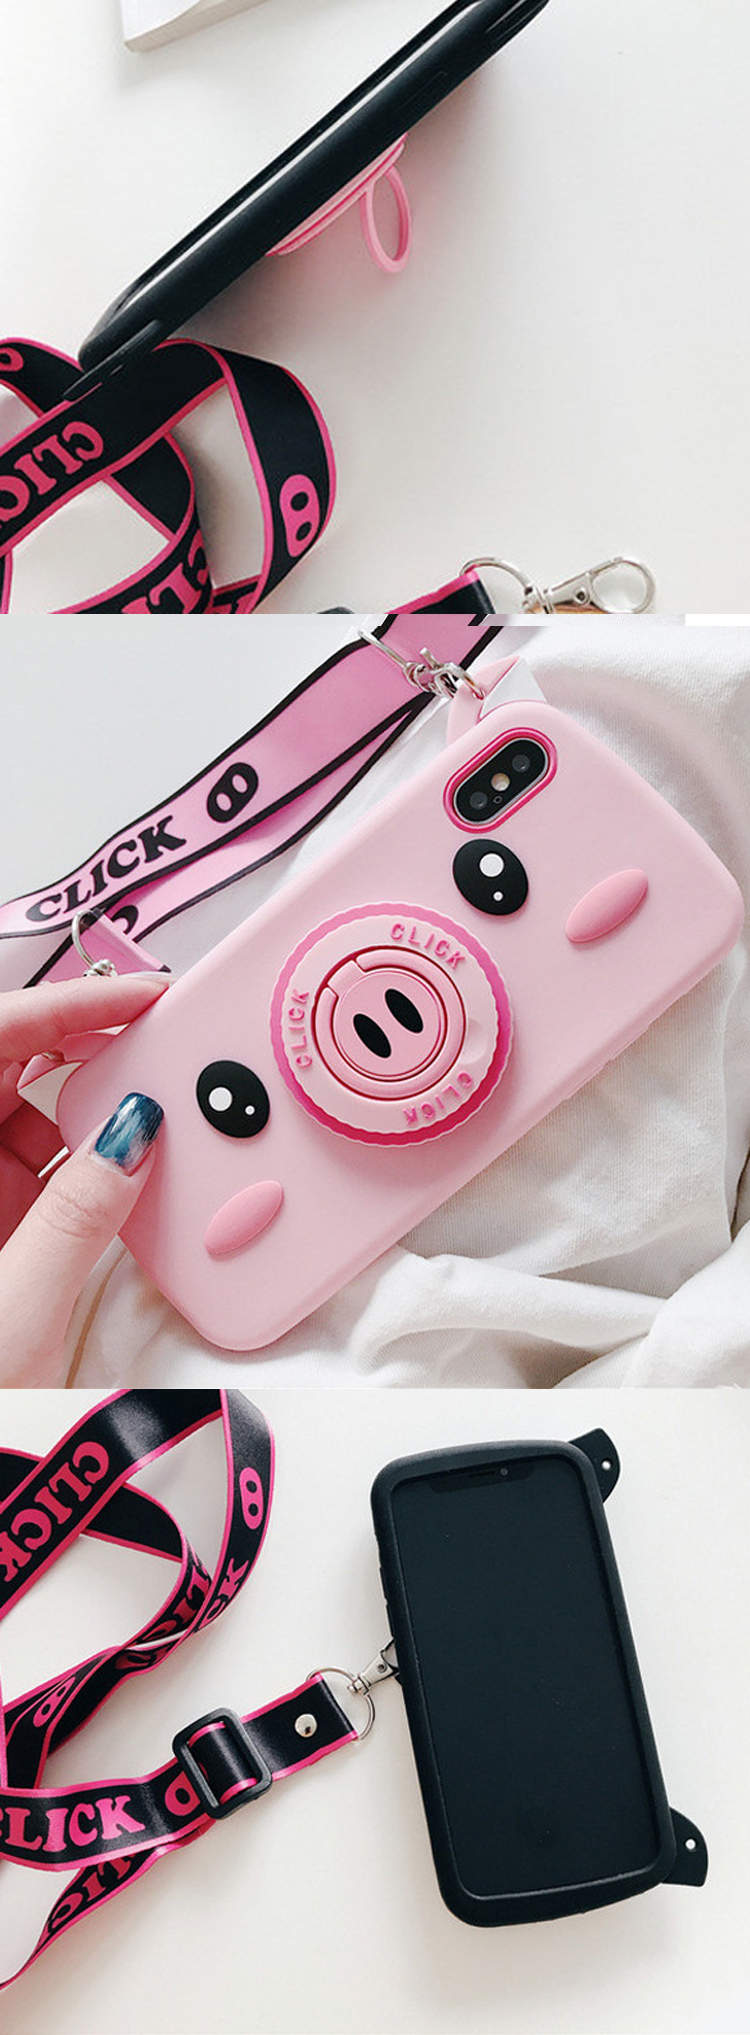 Fashion-Cute-Cartoon-Pig-Pattern-with-Ring-Holder-Stand-Soft-Silicone-Protective-Case-for-iPhone-6---1432944-2